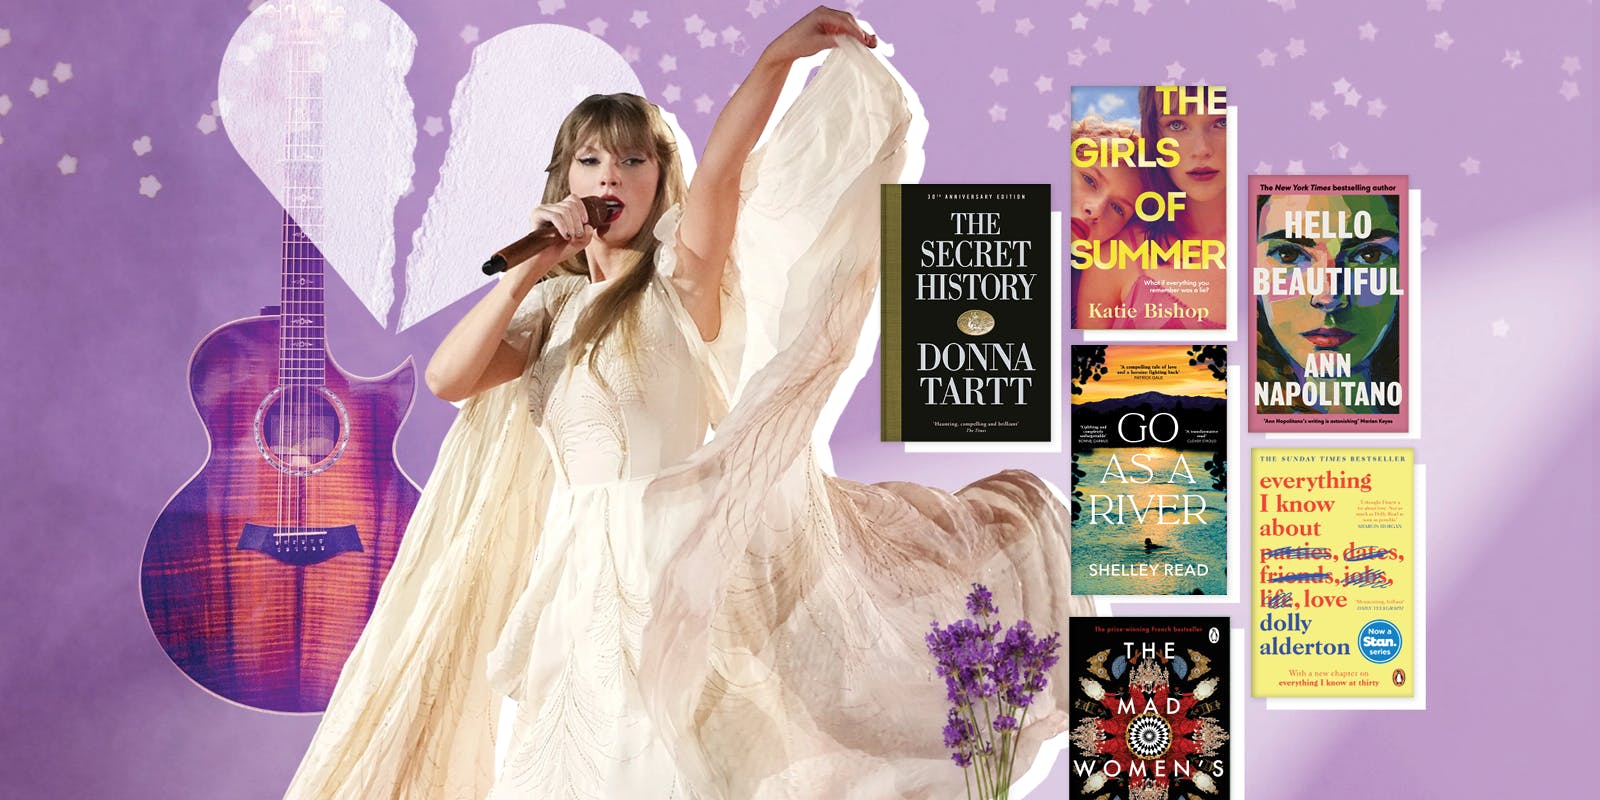 The book to read based on your favourite Taylor Swift era